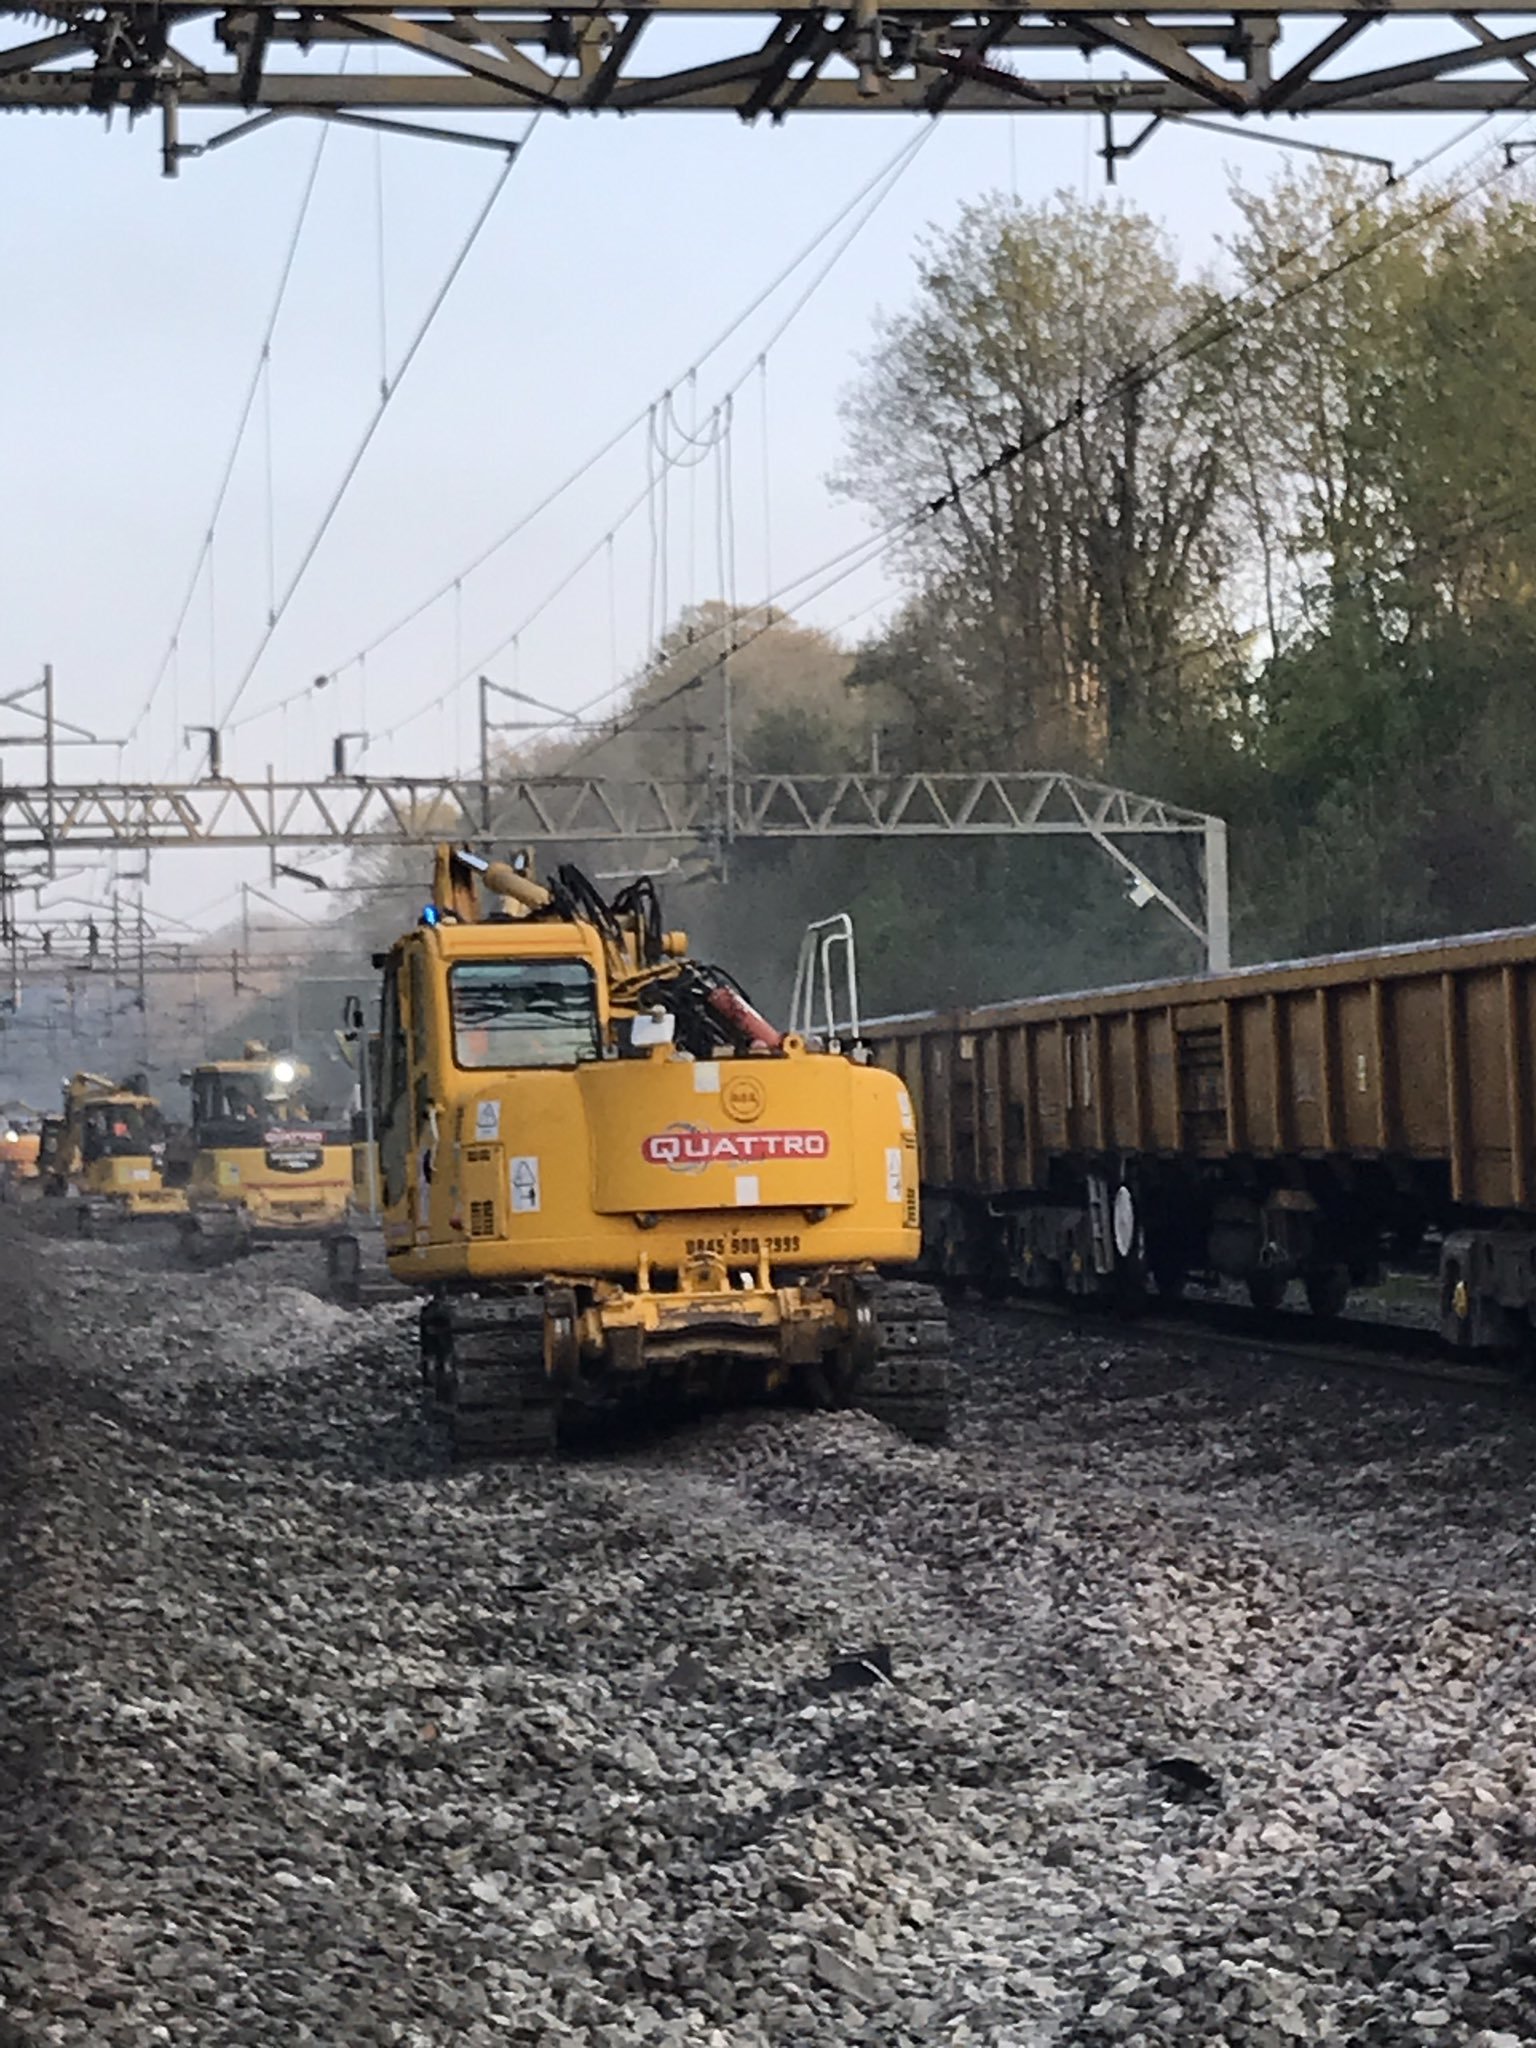 Network Rail said renewing the track near Watford will make it more reliable. Credit: London Euston